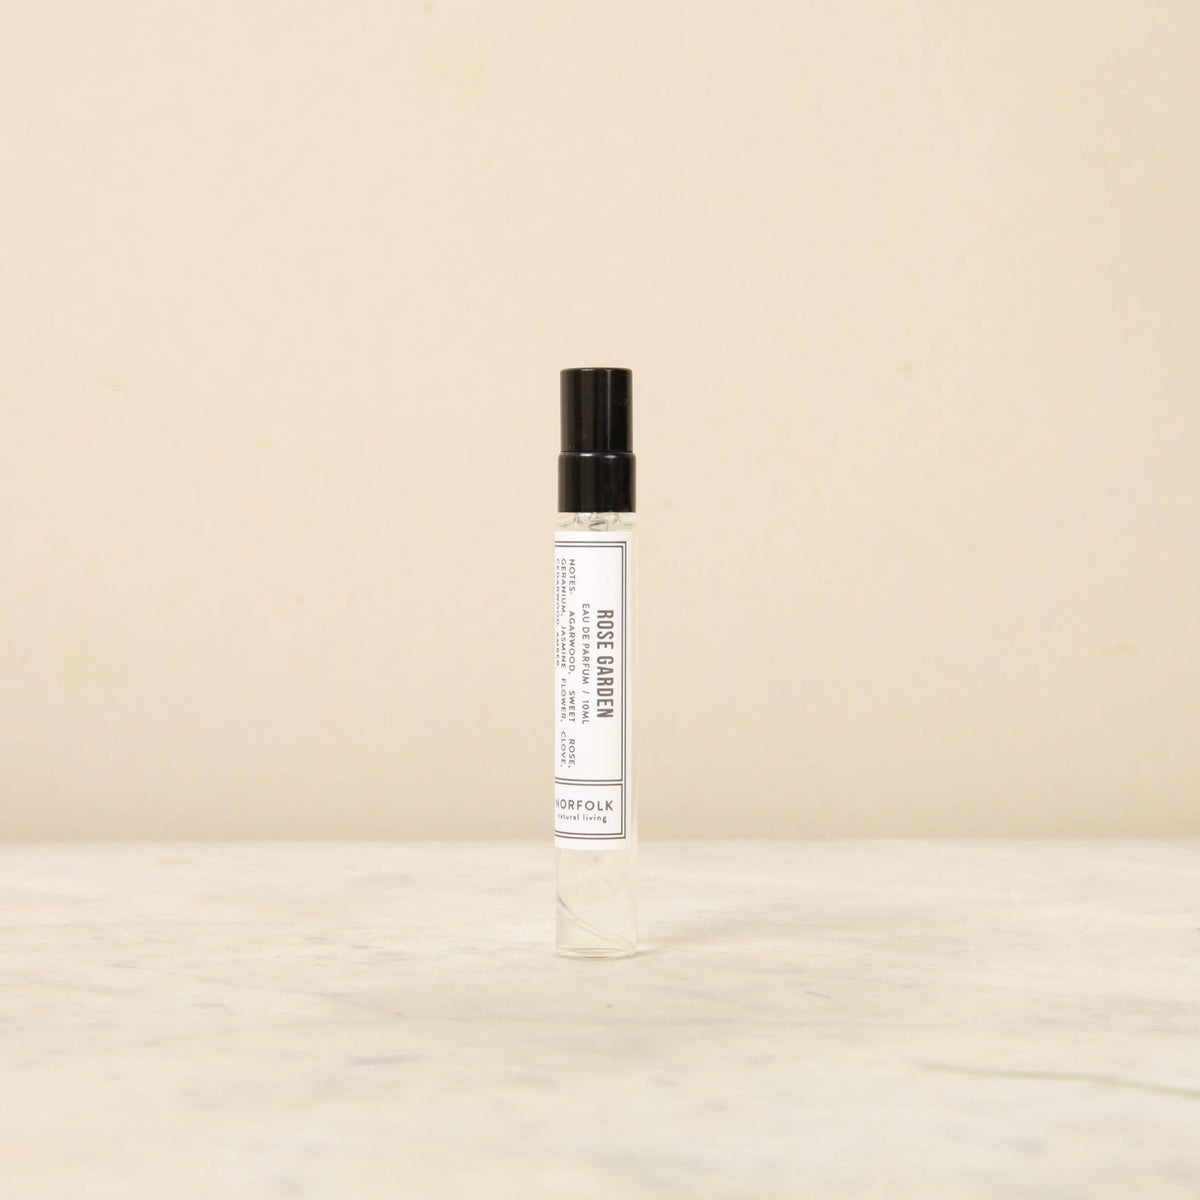 A Norfolk Natural Living Rose Garden Parfum 10ml with a white label and black text, featuring a long-lasting fragrance, standing on a light beige surface against a neutral background.